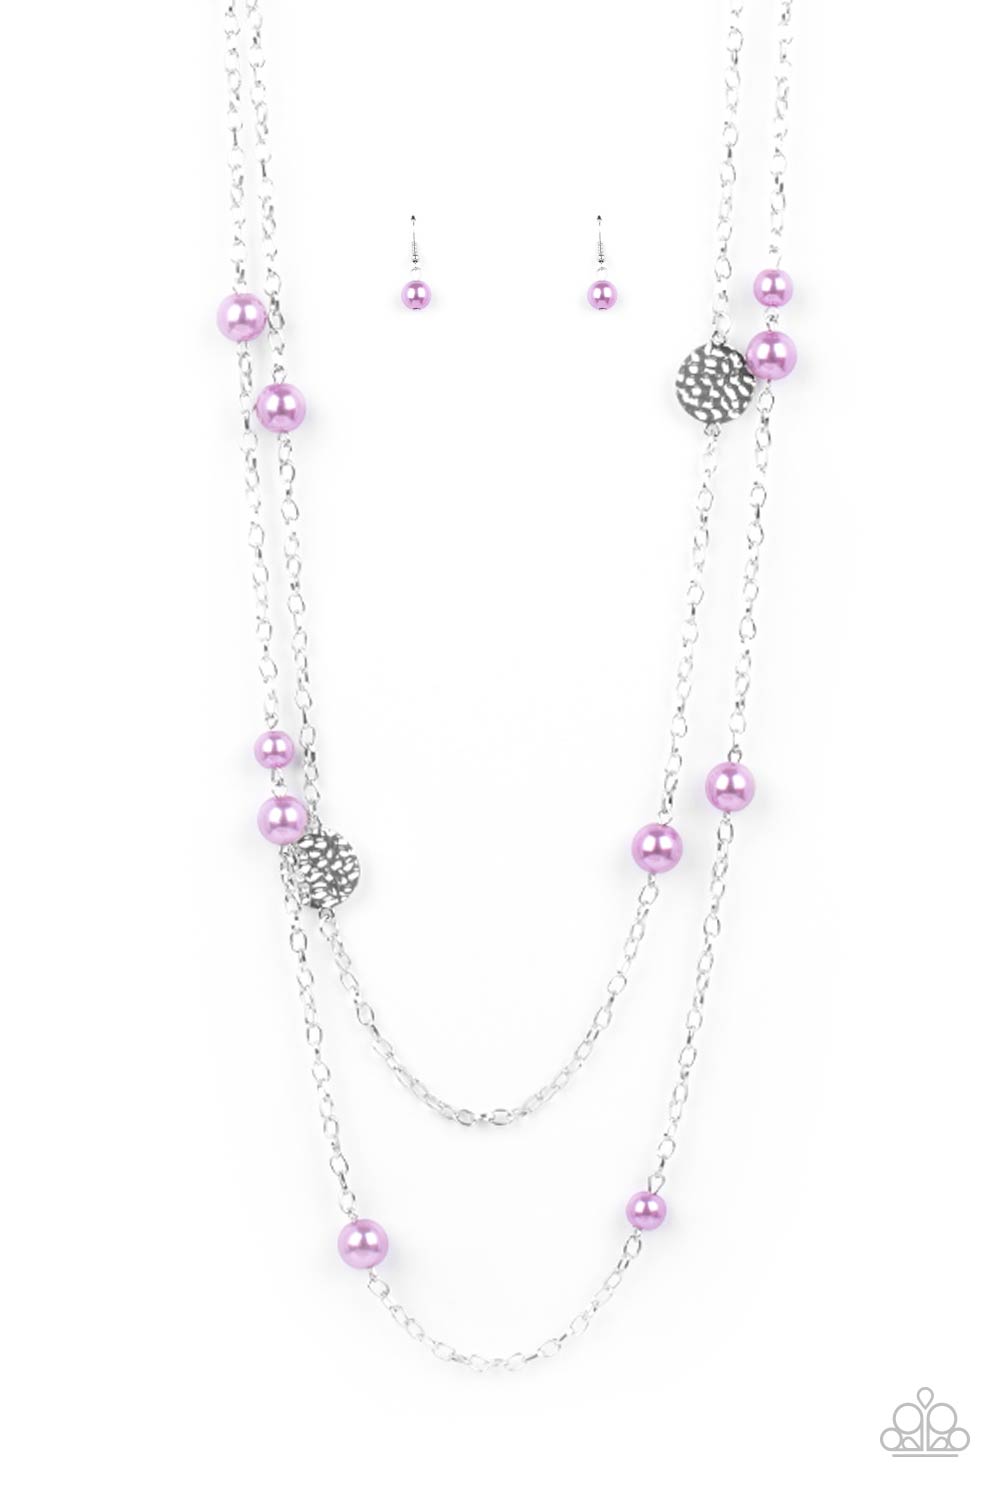 Sublime Awakening - Purple Pearl Fashion Necklace - Paparazzi Accessories - Double strands of lengthened silver chains are adorned with soft purple pearls. Three shiny hammered silver discs create bold asymmetrical accents for an eye-catching finish. Features an adjustable clasp closure. Sold as one individual necklace.